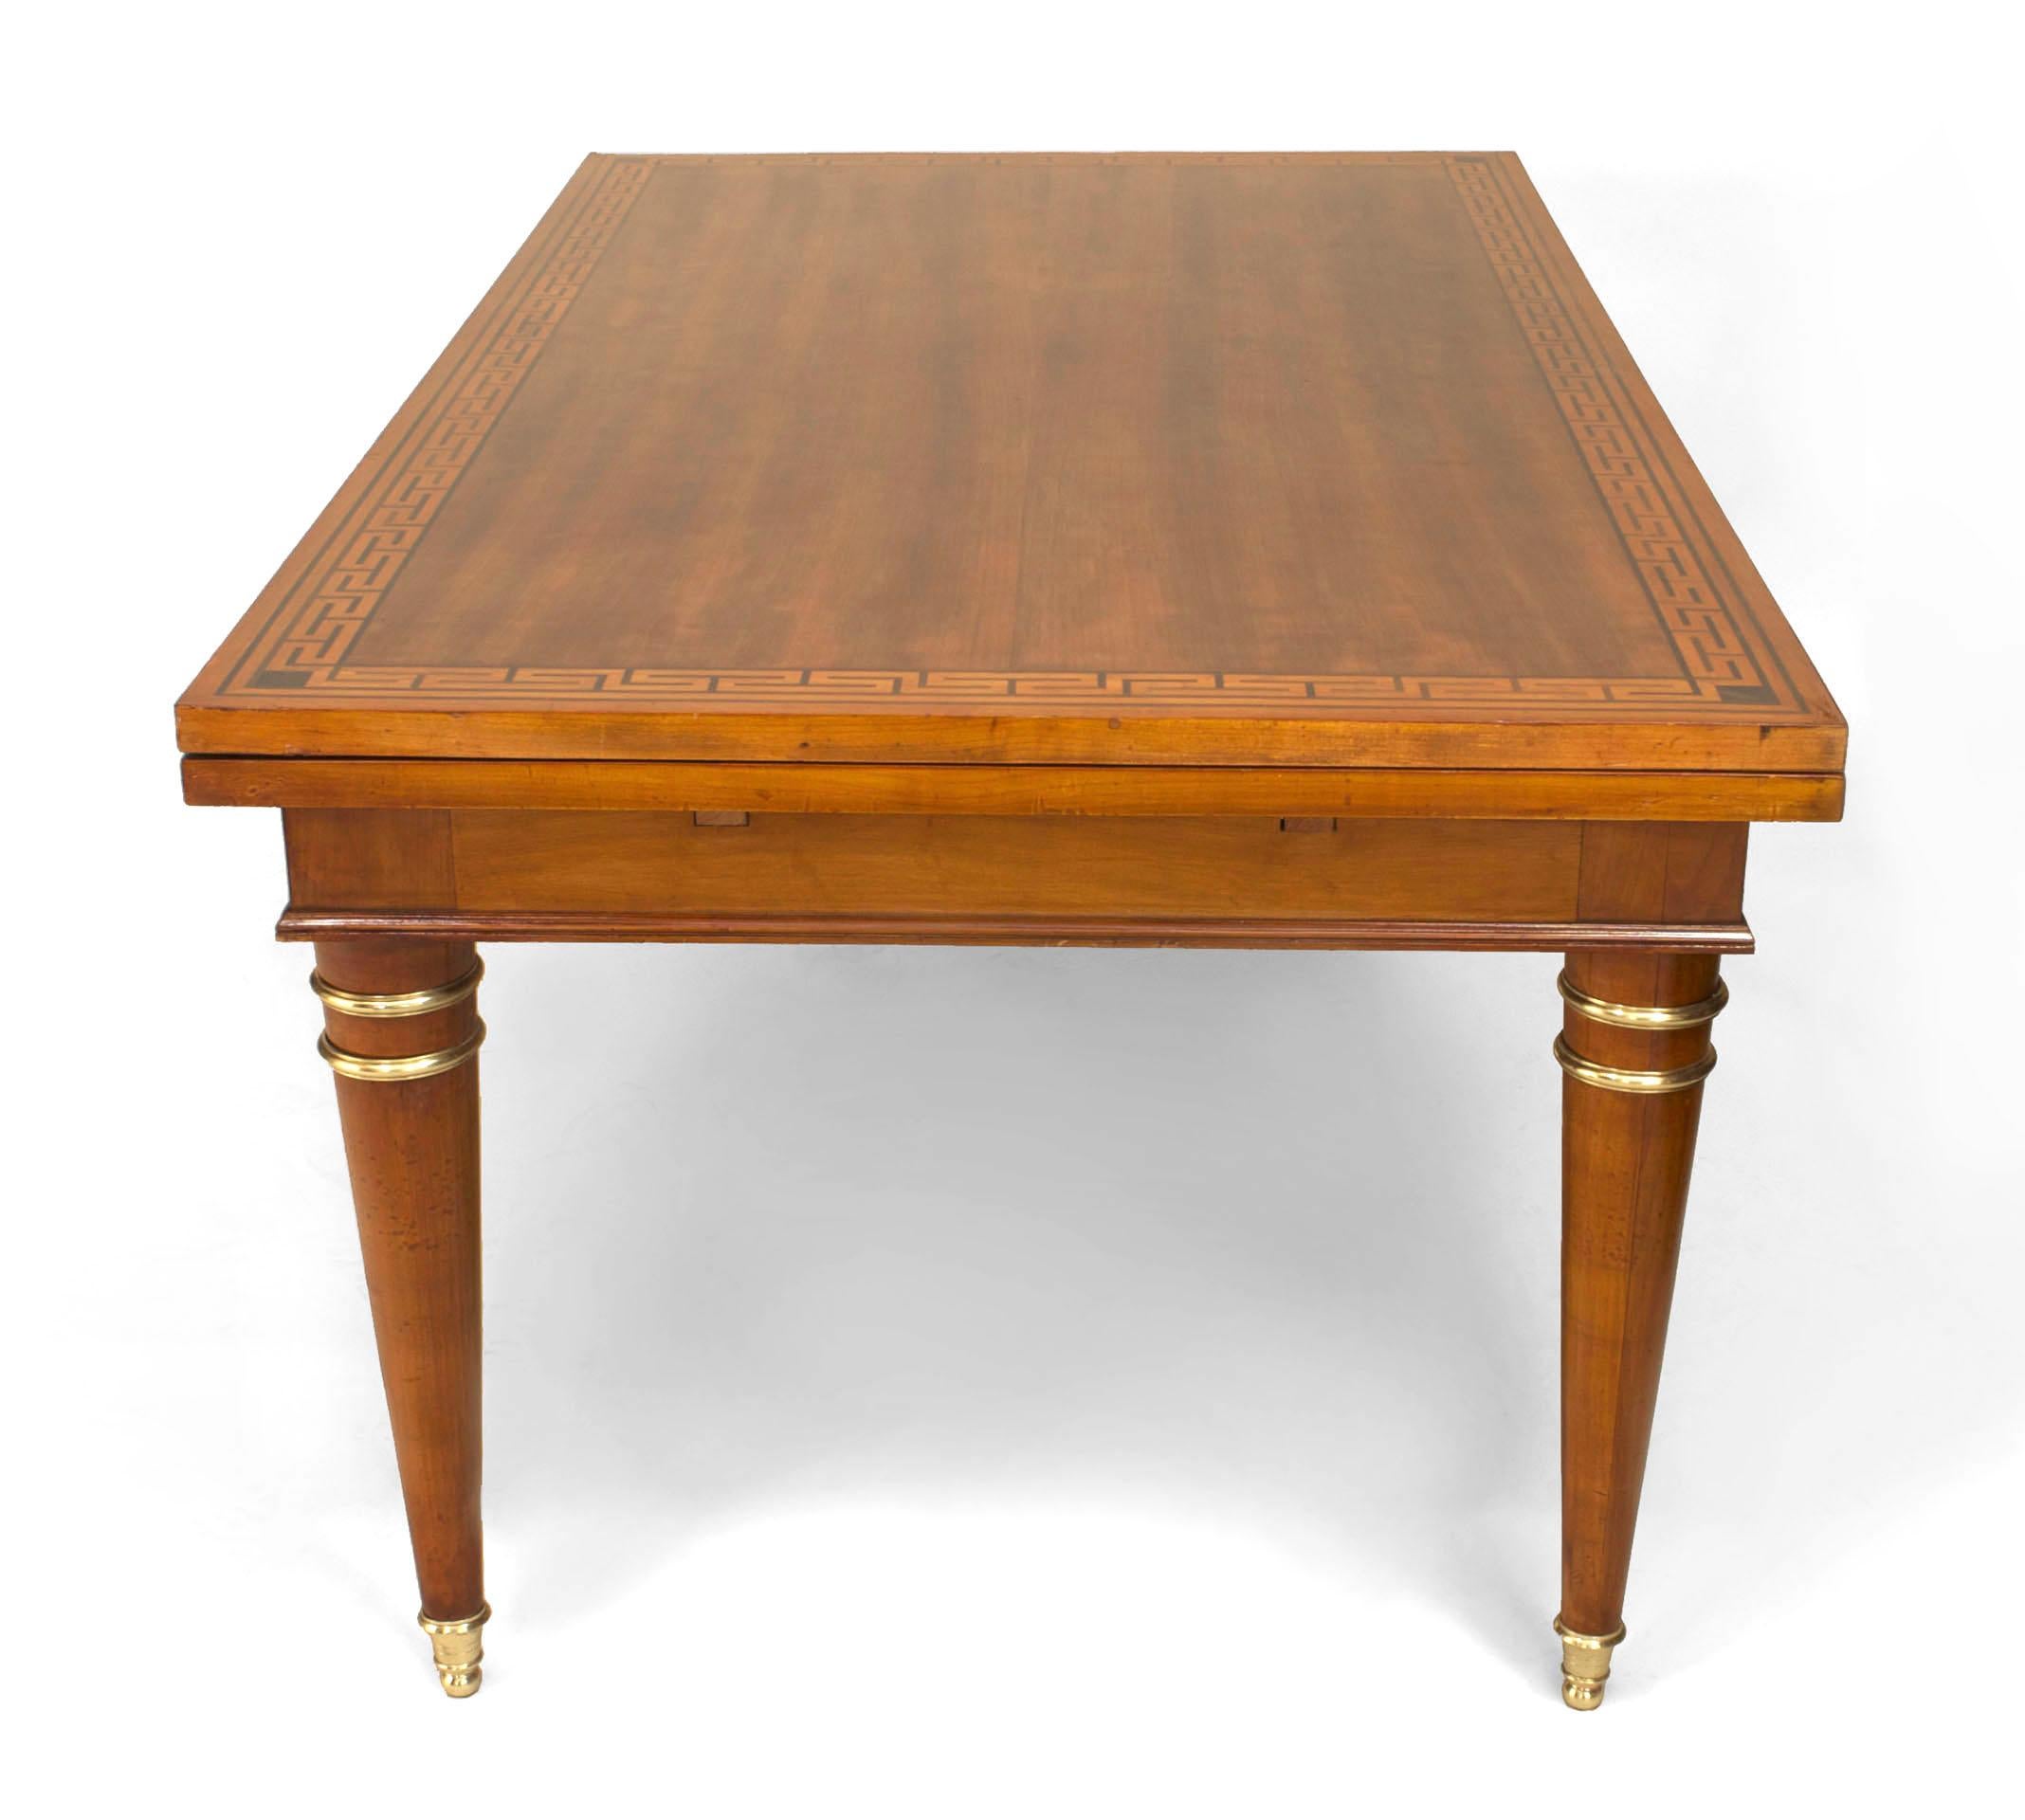 French Mid-Century (1940s) mahogany rectangular dining table with a Greek key inlaid border & interior extension leaves (2 Leaves - 31